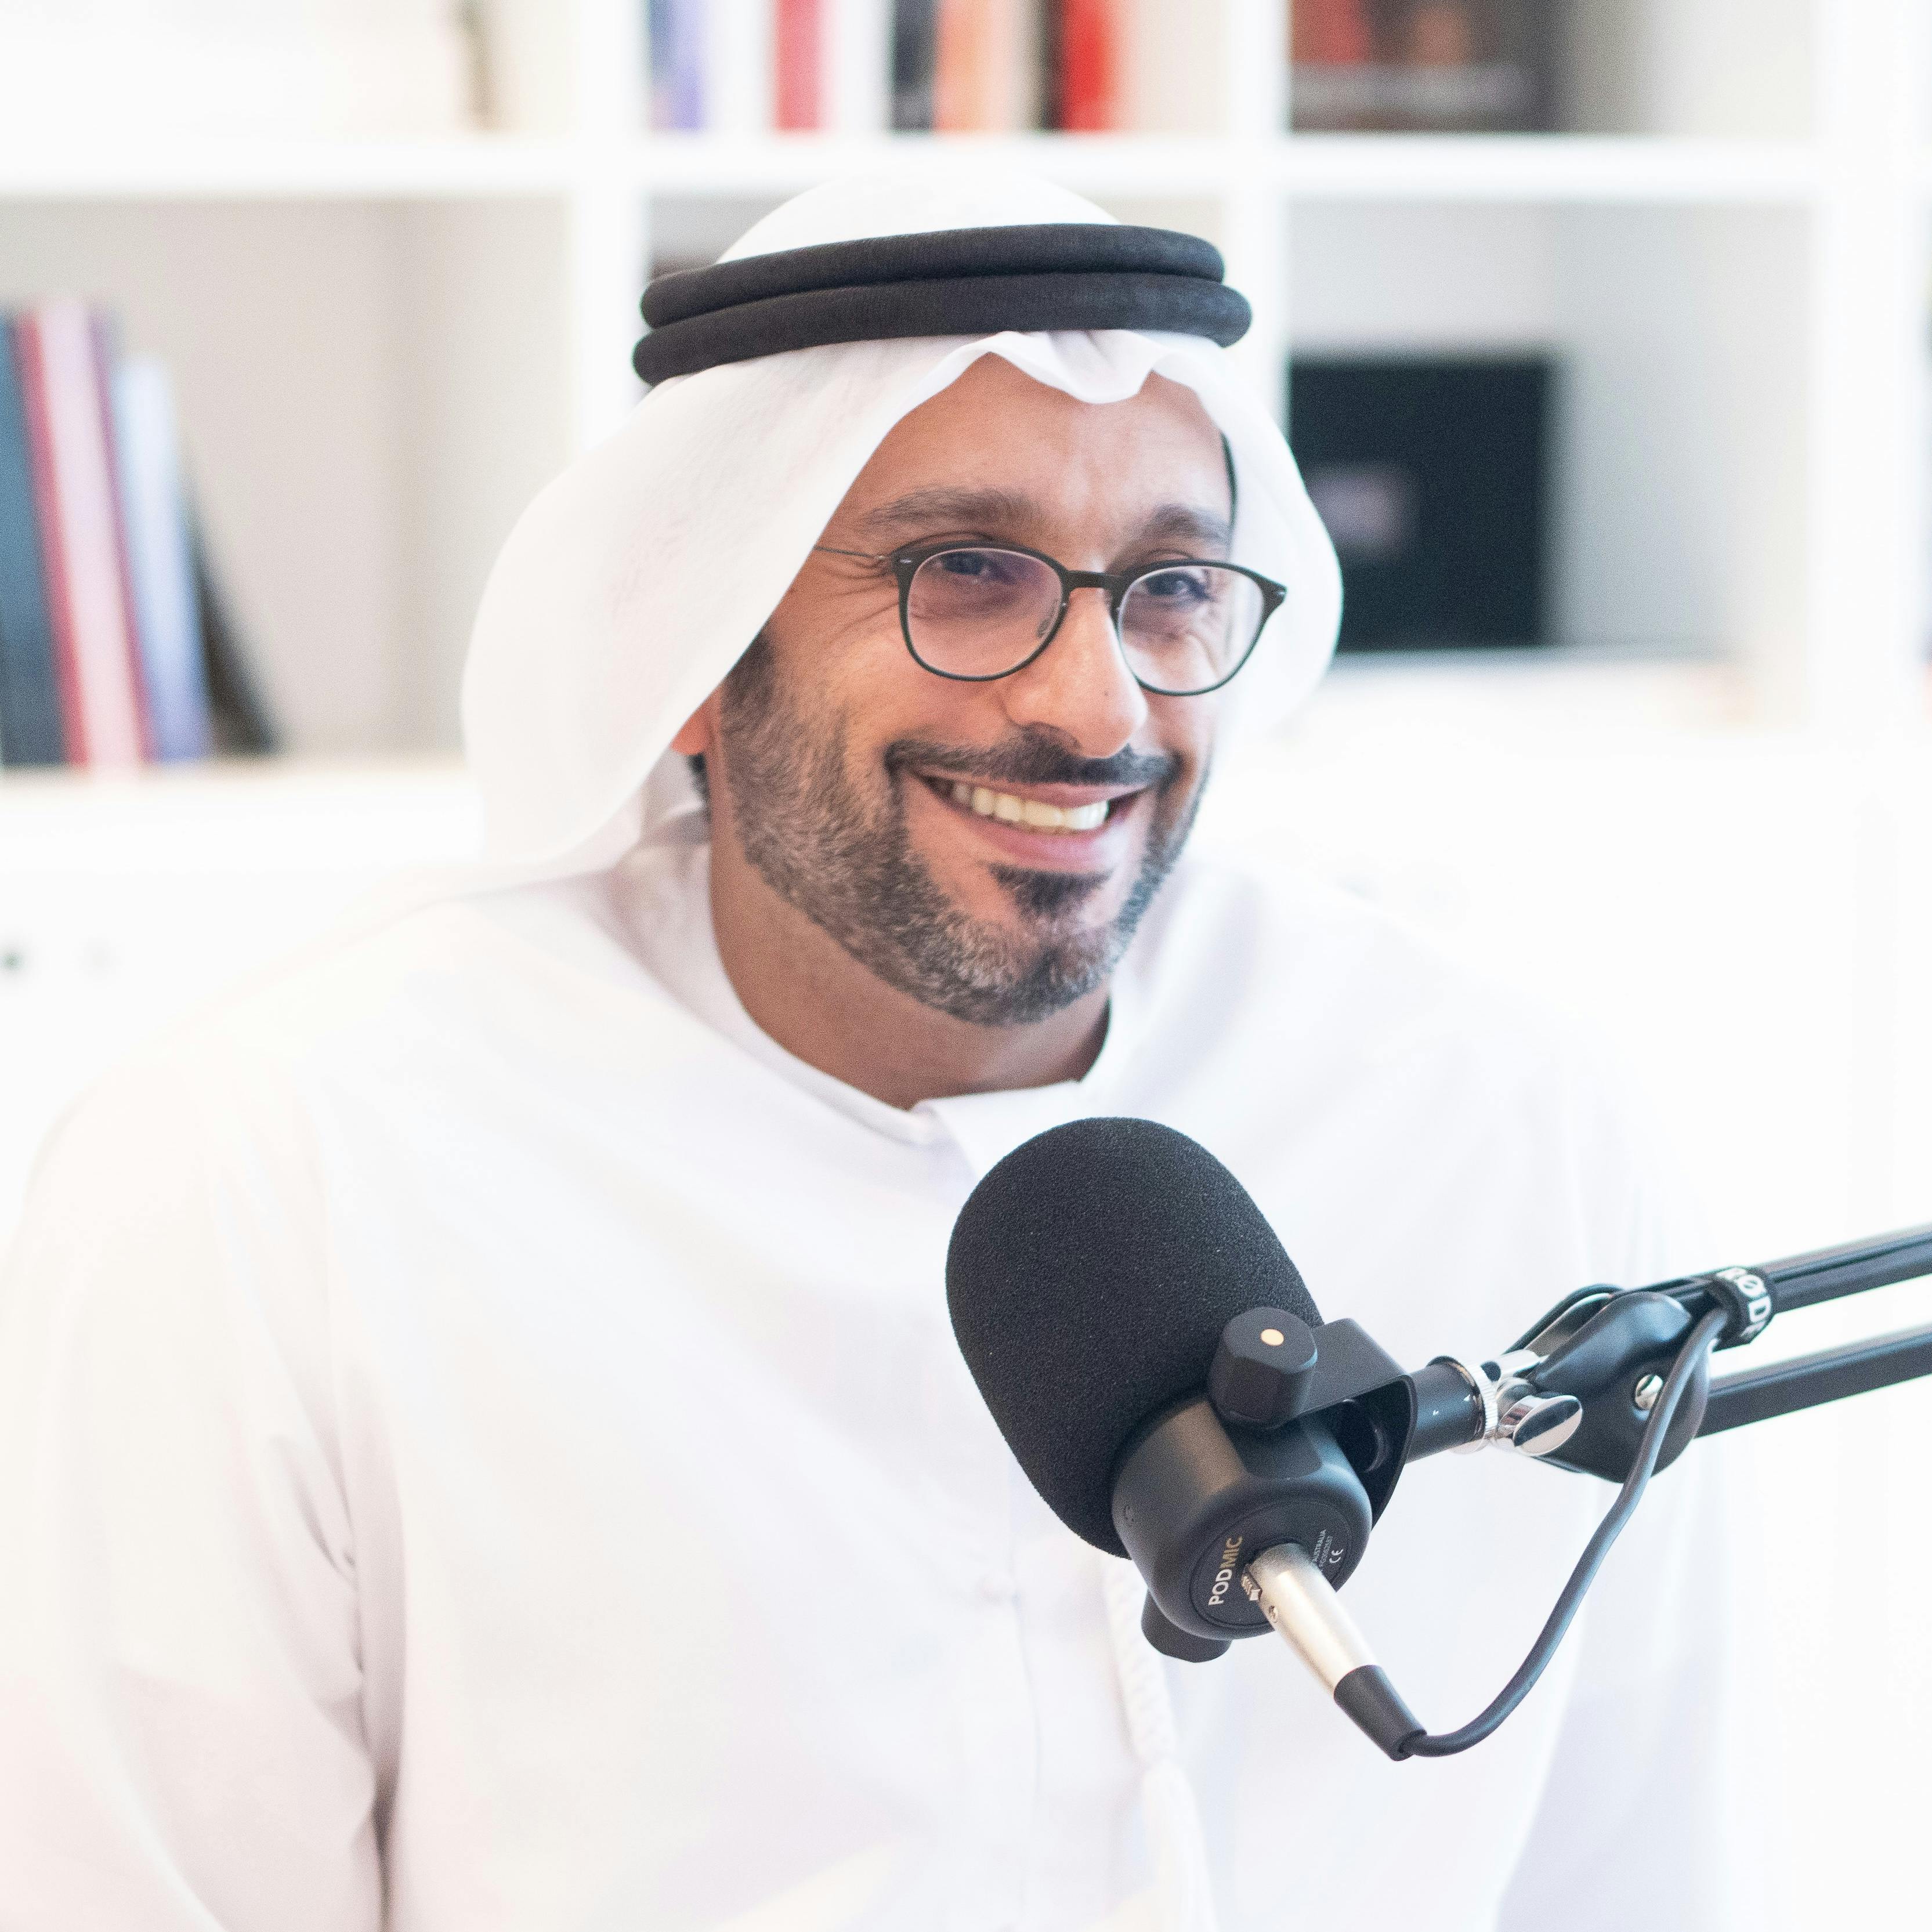 “Success is not only measured by financial results but also by cultural relevance.” Ahmad Al Marri on launching Canvas Gelato against the odds and why community support was crucial to his success.